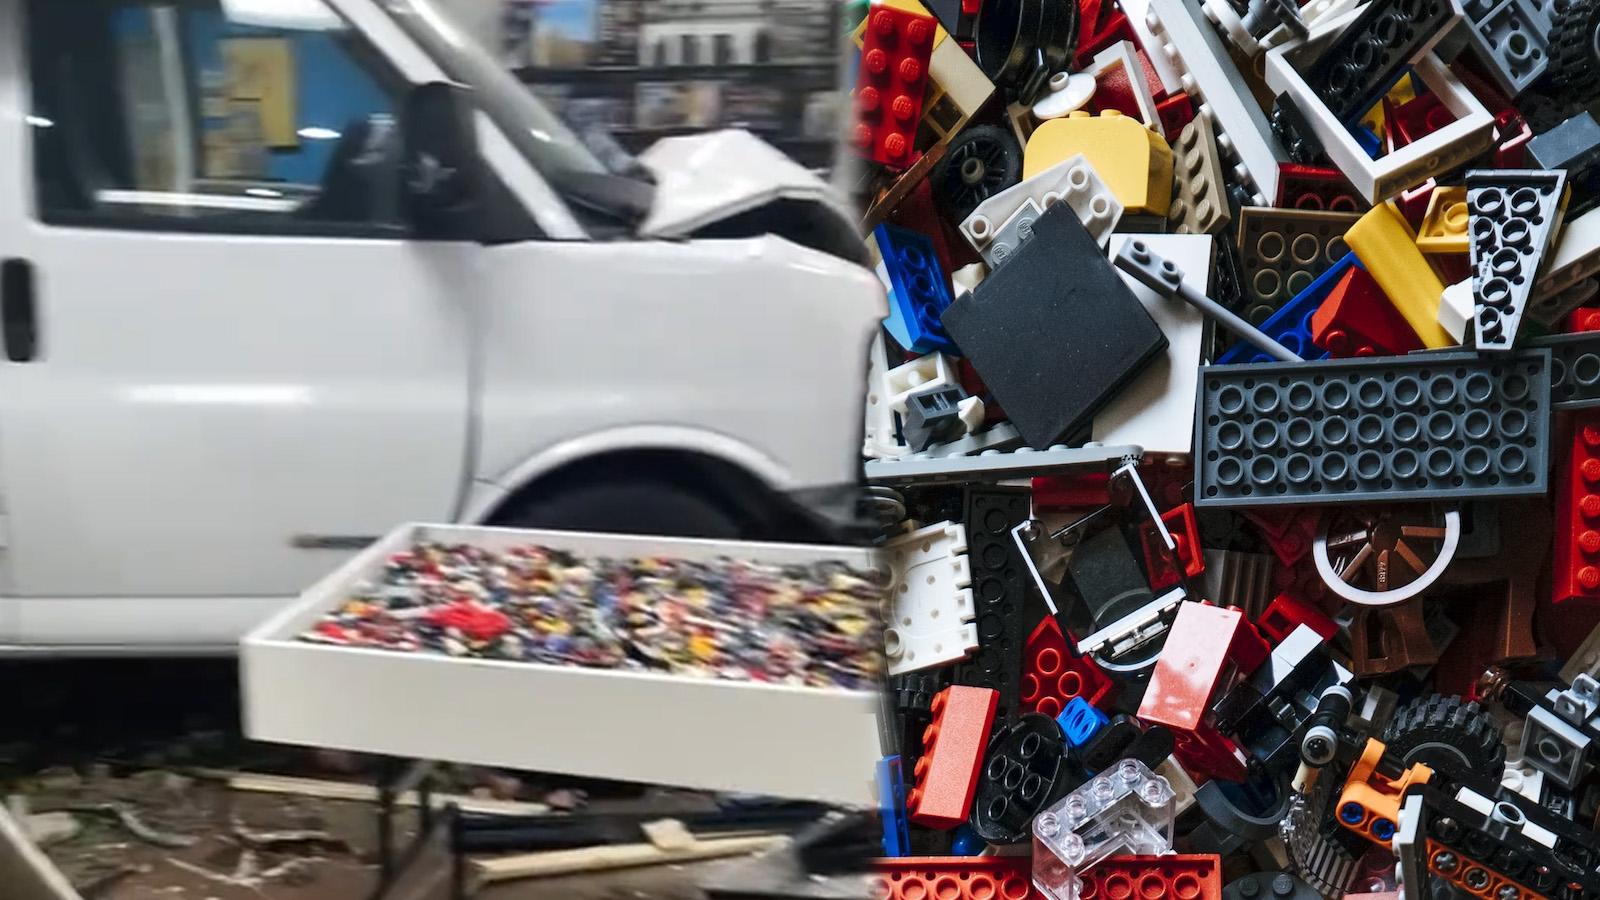 Man on the run after driving cargo van through LEGO store